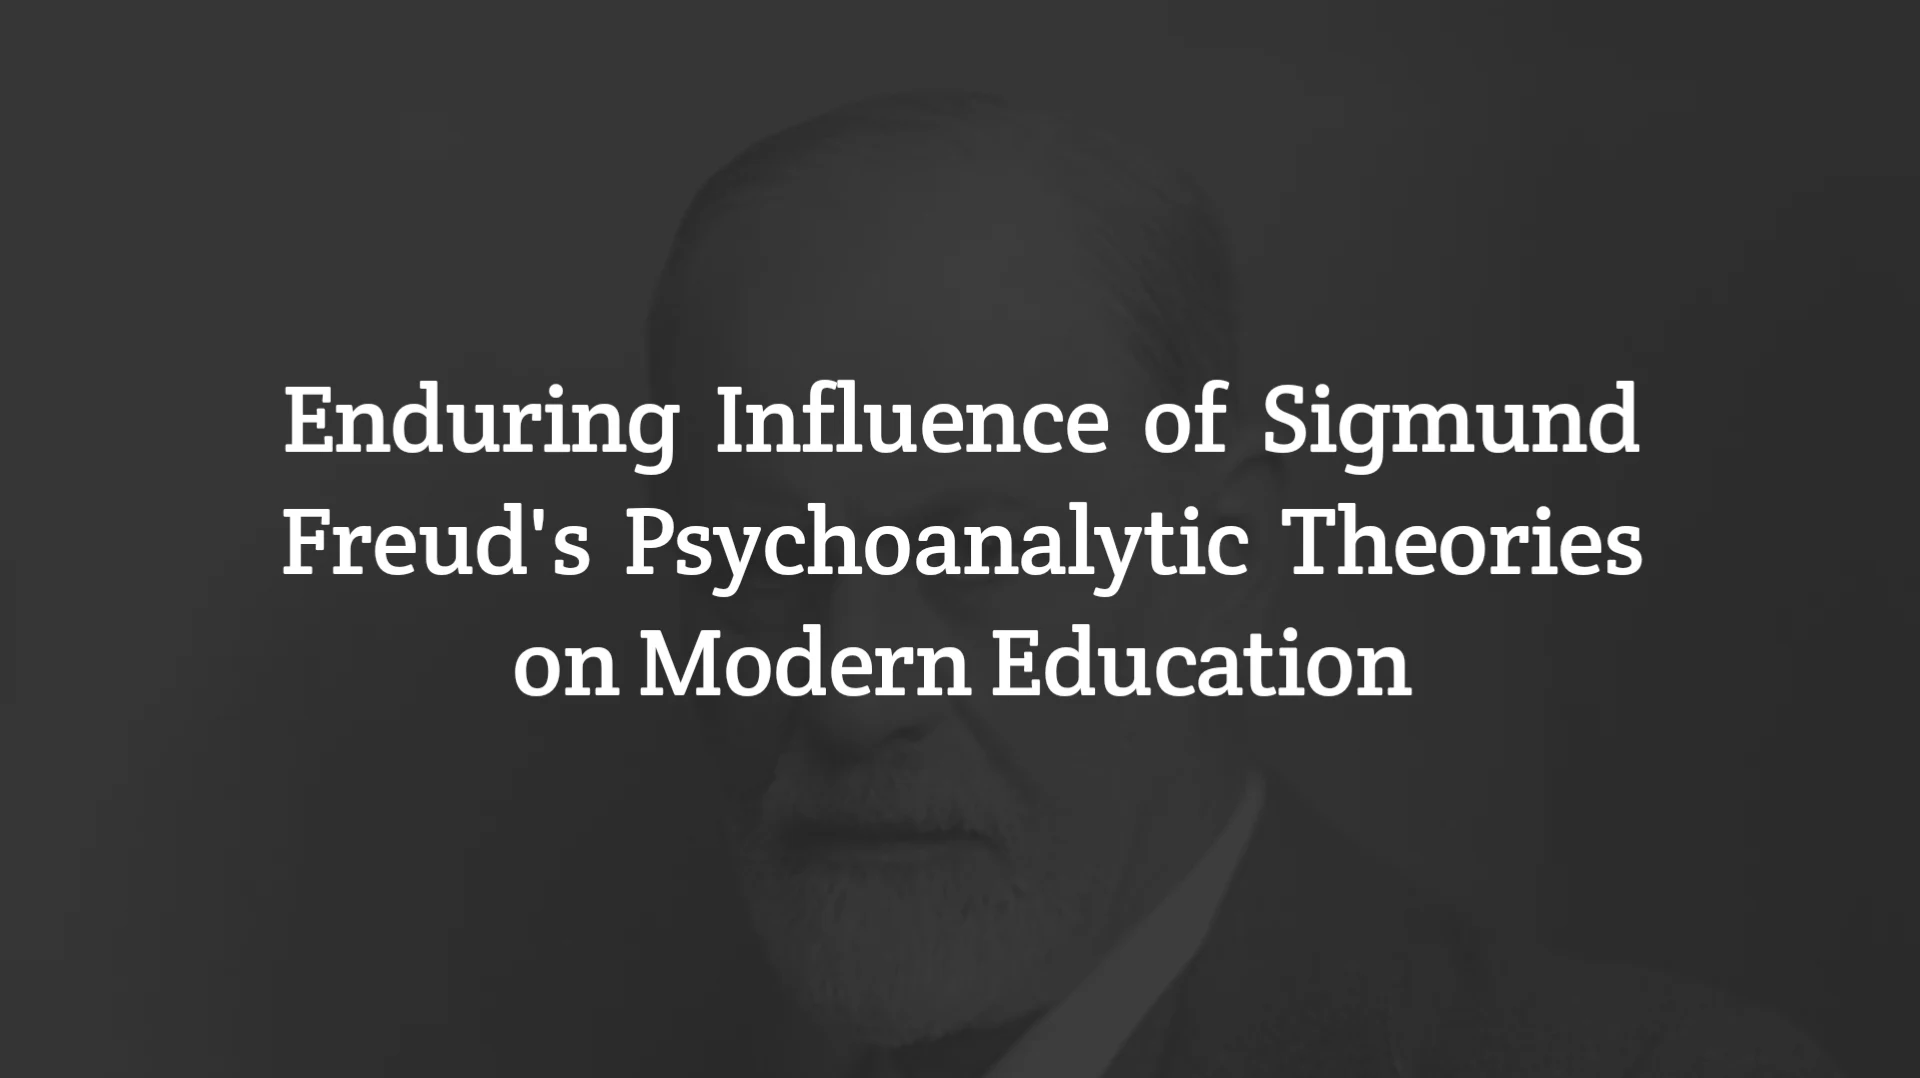 Enduring Influence of Sigmund Freud's Psychoanalytic Theories on Modern Education